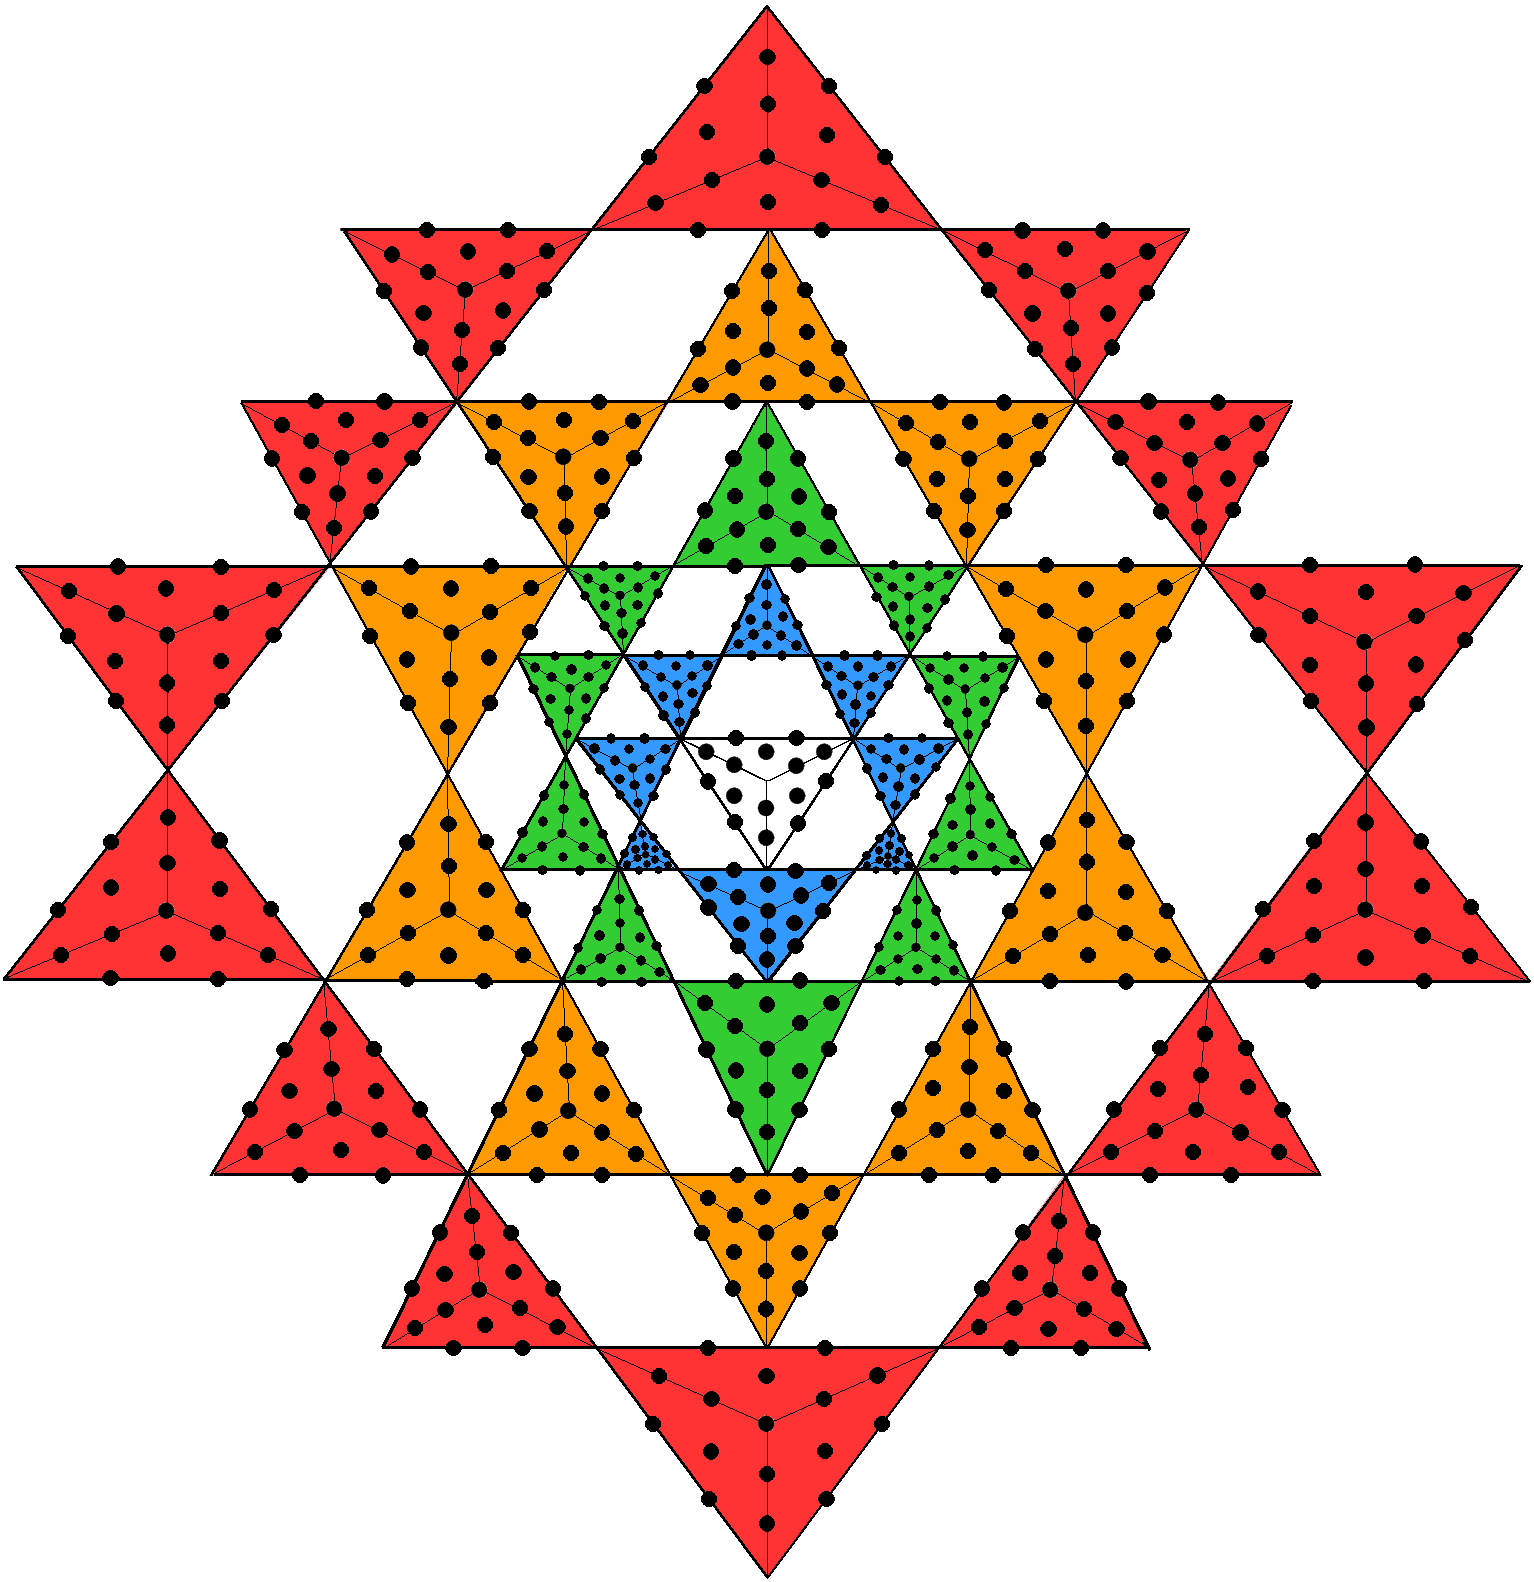 687 yods not vertices in 43 triangles of 3-d Sri Yantra